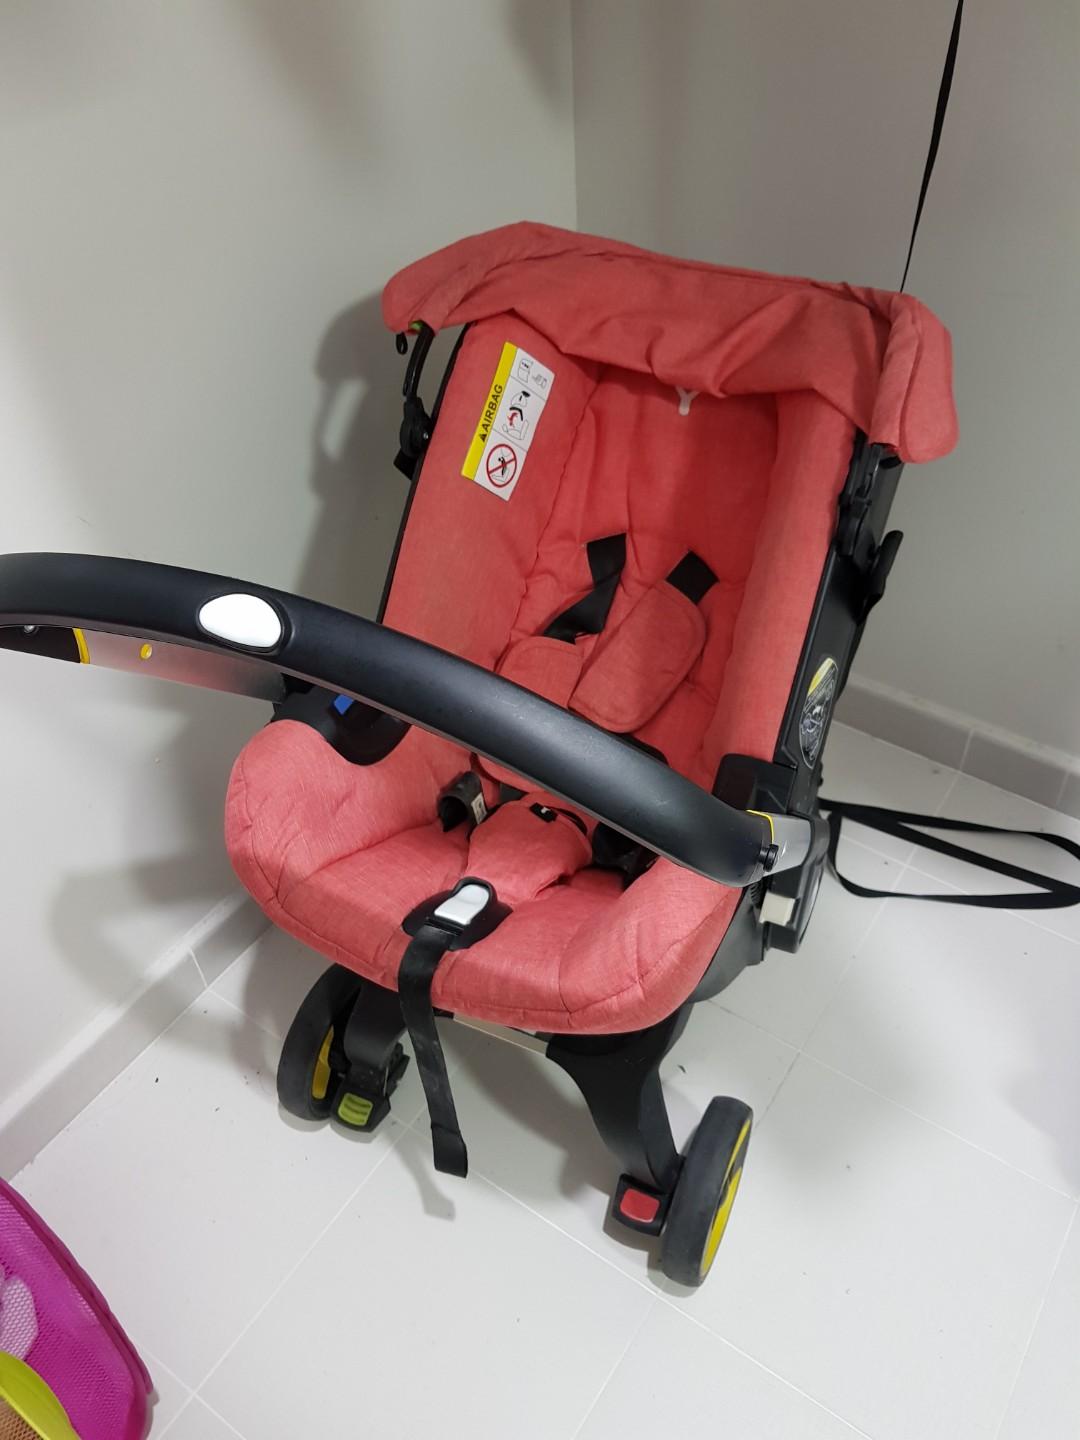 foofoo stroller review